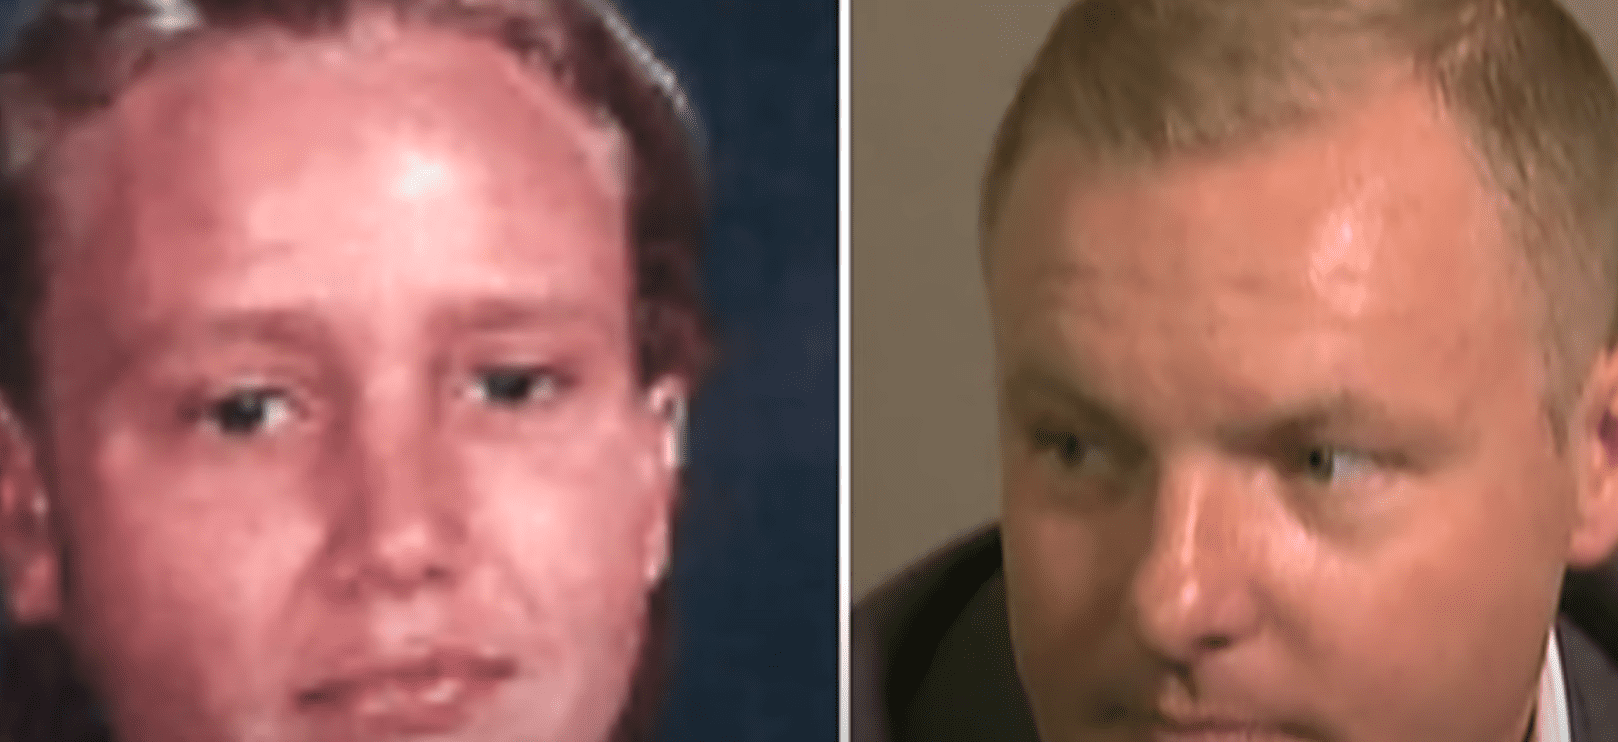 A man found himself on a missing children website and recognized himself because of an age-progression image | Photo: Youtube/CBS